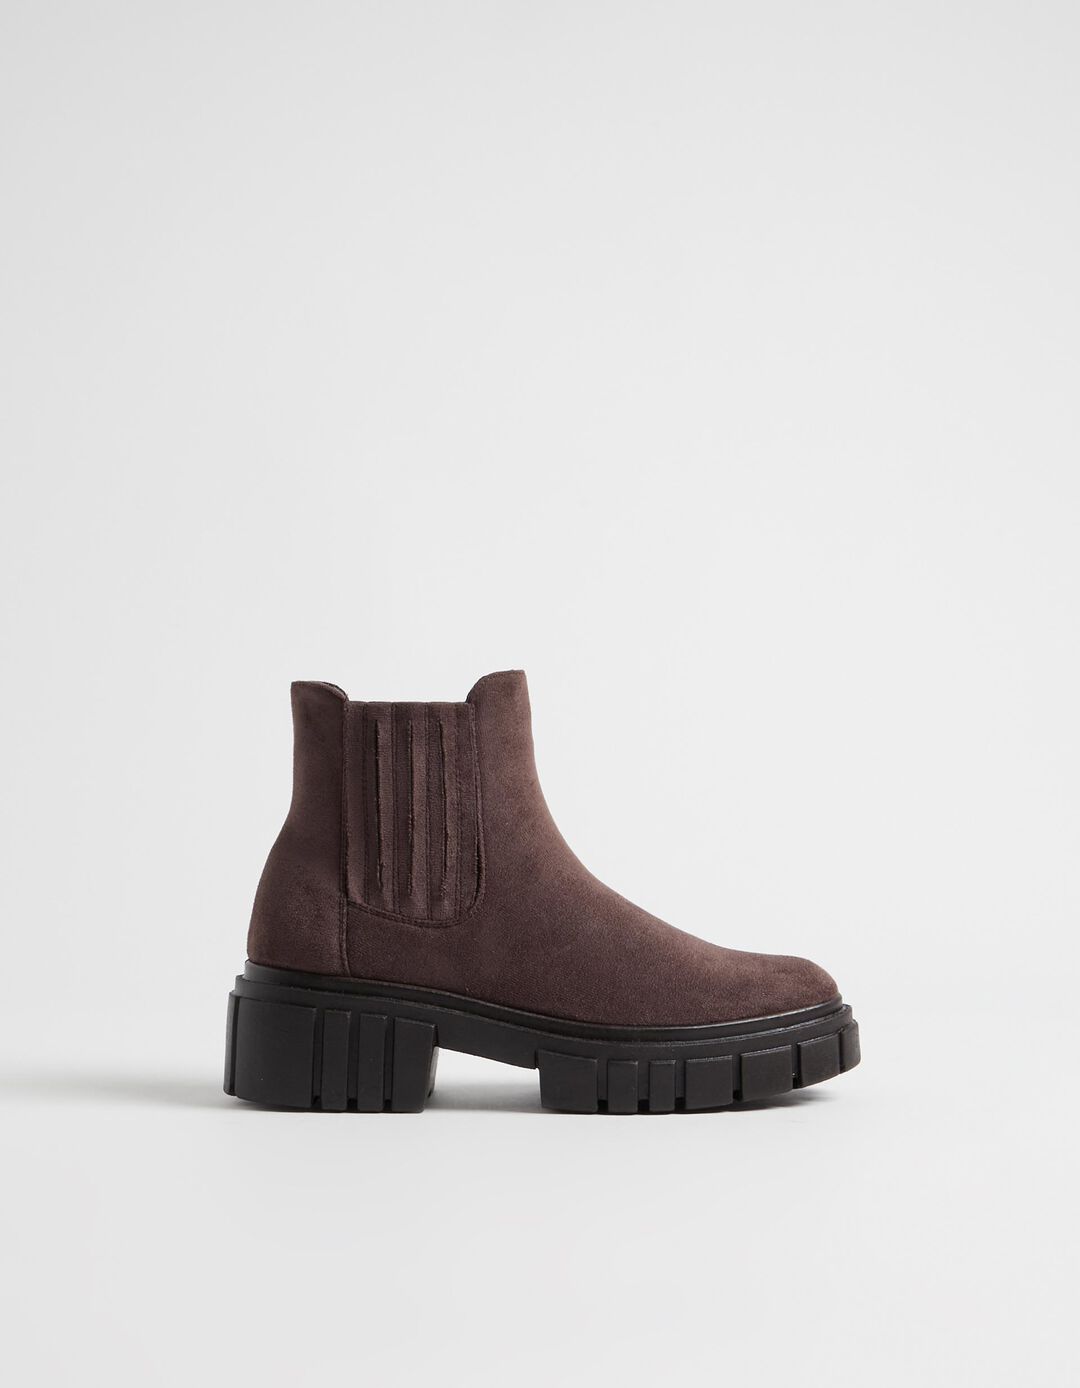 Tractor Sole Chelsea Boots, Women, Brown